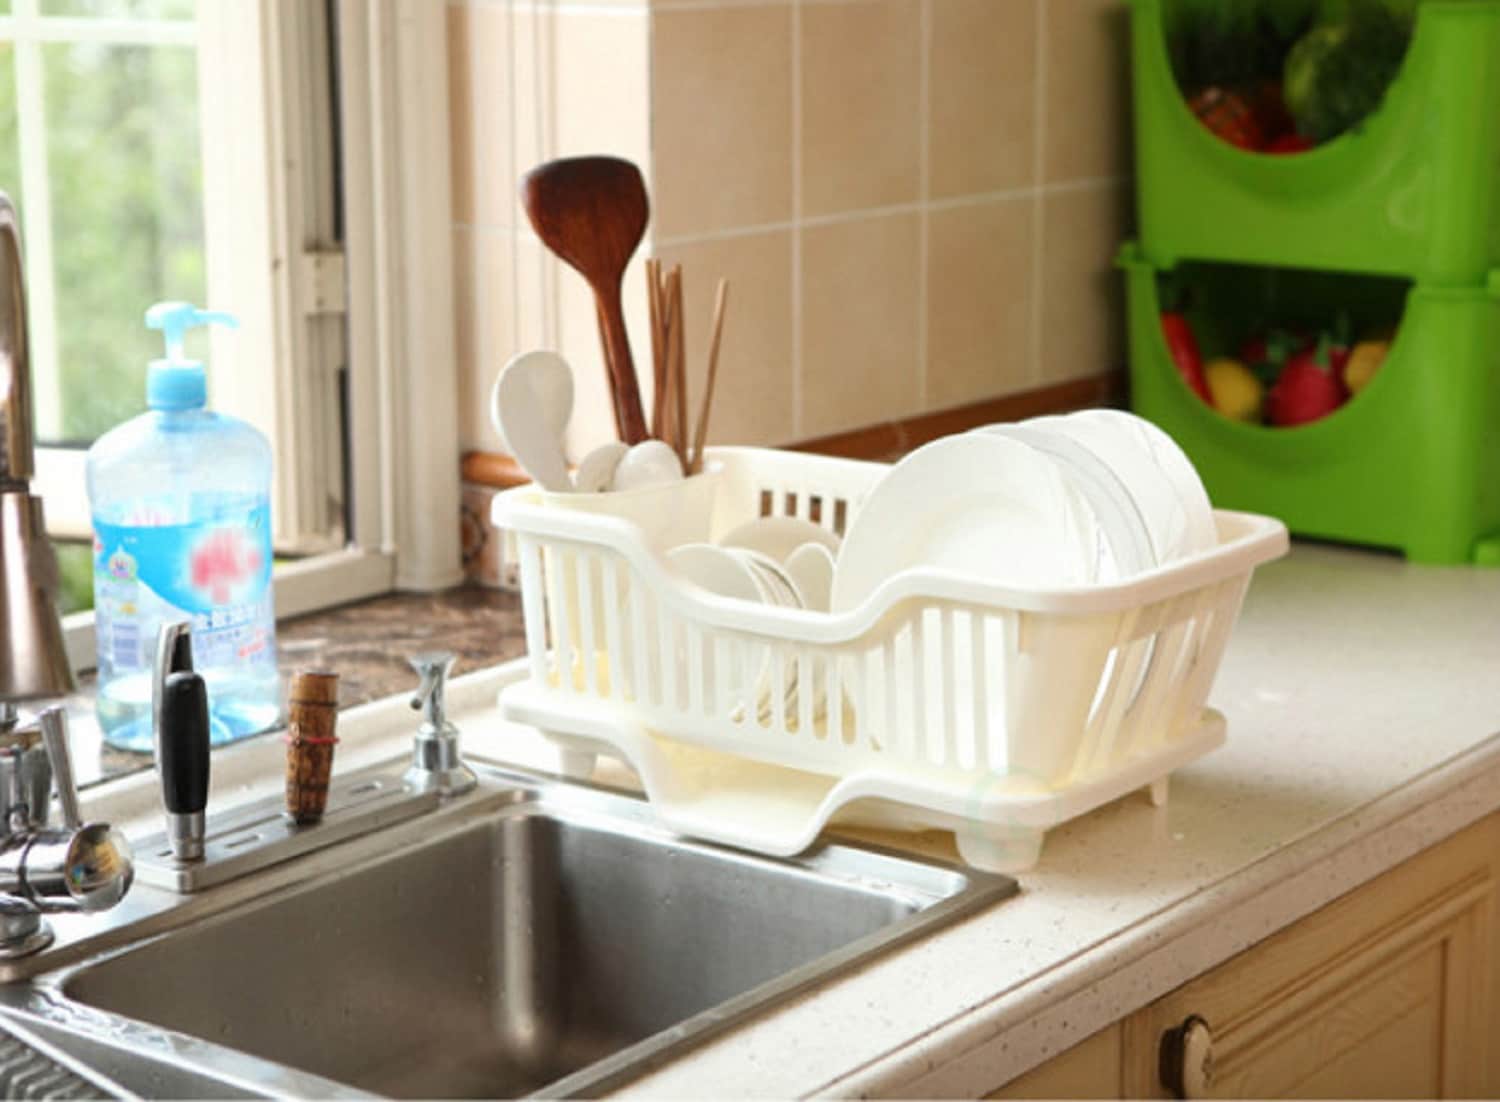 Kitchen Details 11.02-in W x 18.11-in L x 3.54-in H Polypropylene Dish Rack  and Drip Tray